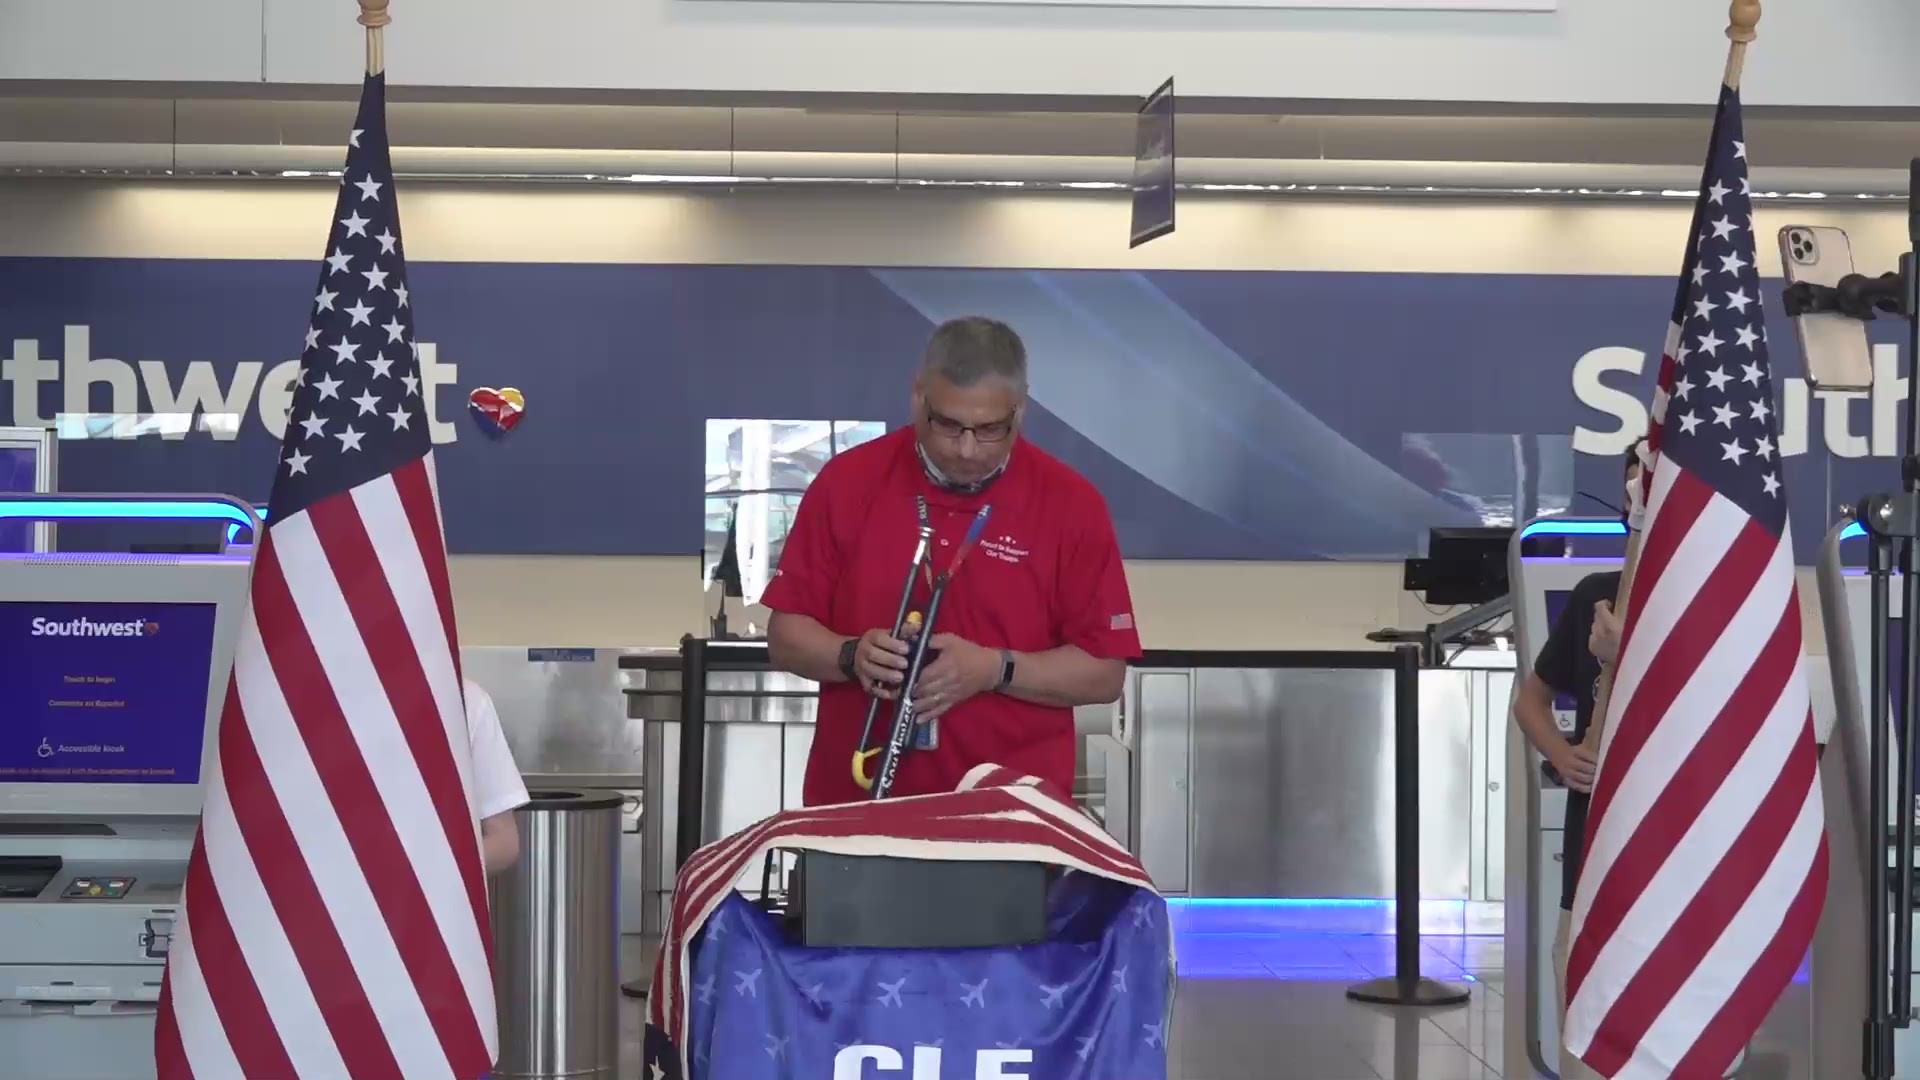 An Southwest Airlines employee at Cleveland Hopkins International Airport took part in Taps Across America to pay tribute to Memorial Day.